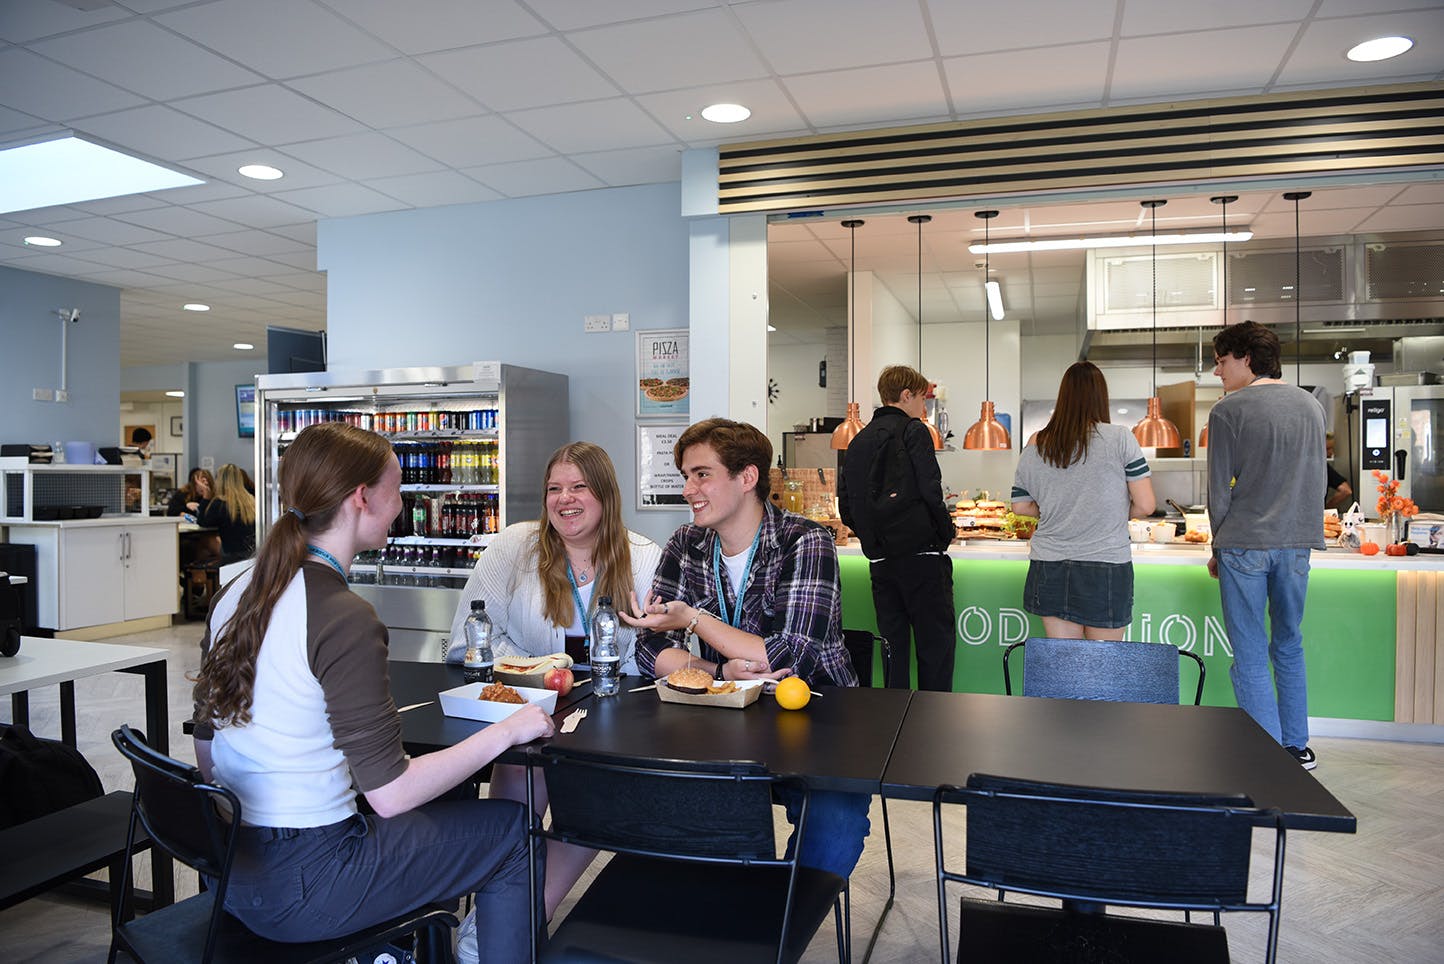 Students relaxing in the cafe